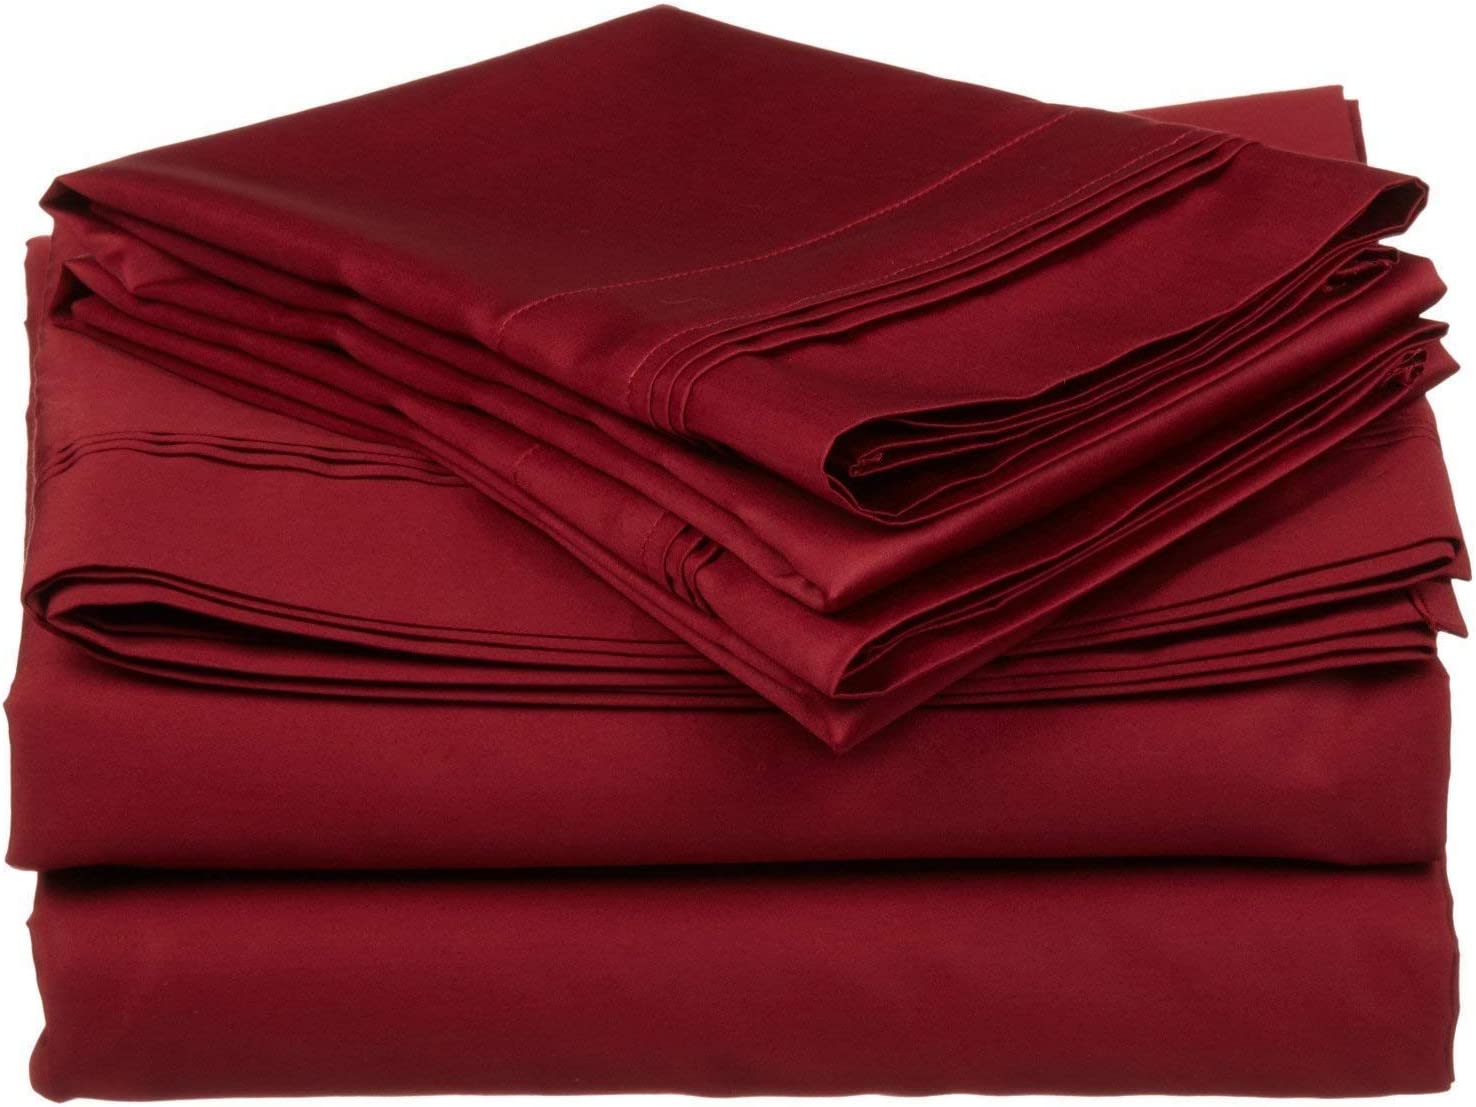 25 Inch Pocket Fitted Sheet Burgundy 1000TC Egyptian Cotton